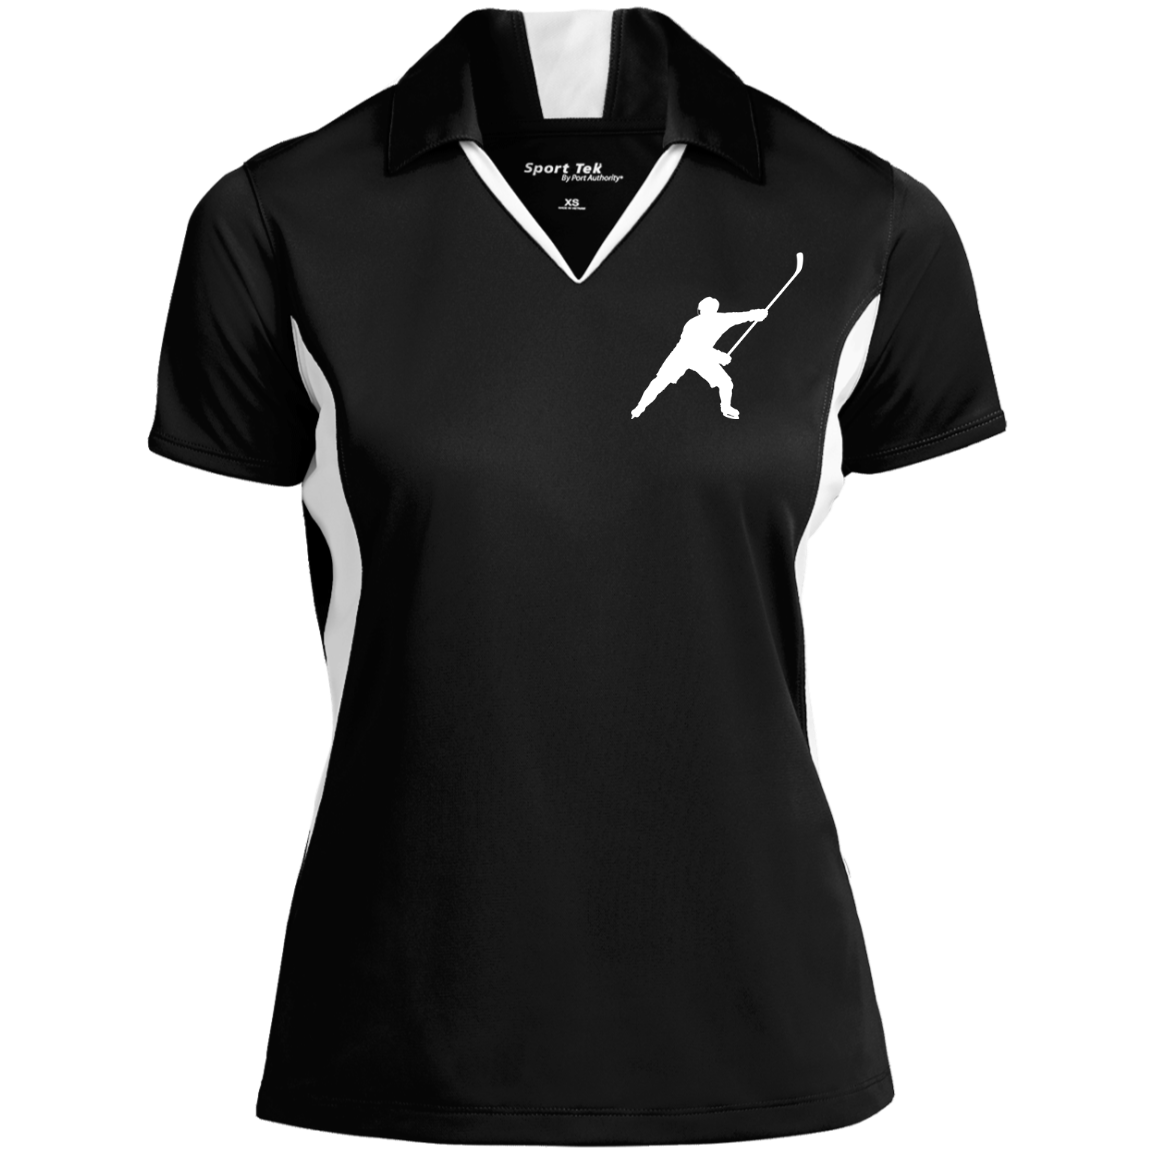 MY SPORT HOCKEY™ LADIES' EMBROIDERED PERFORMANCE POLO